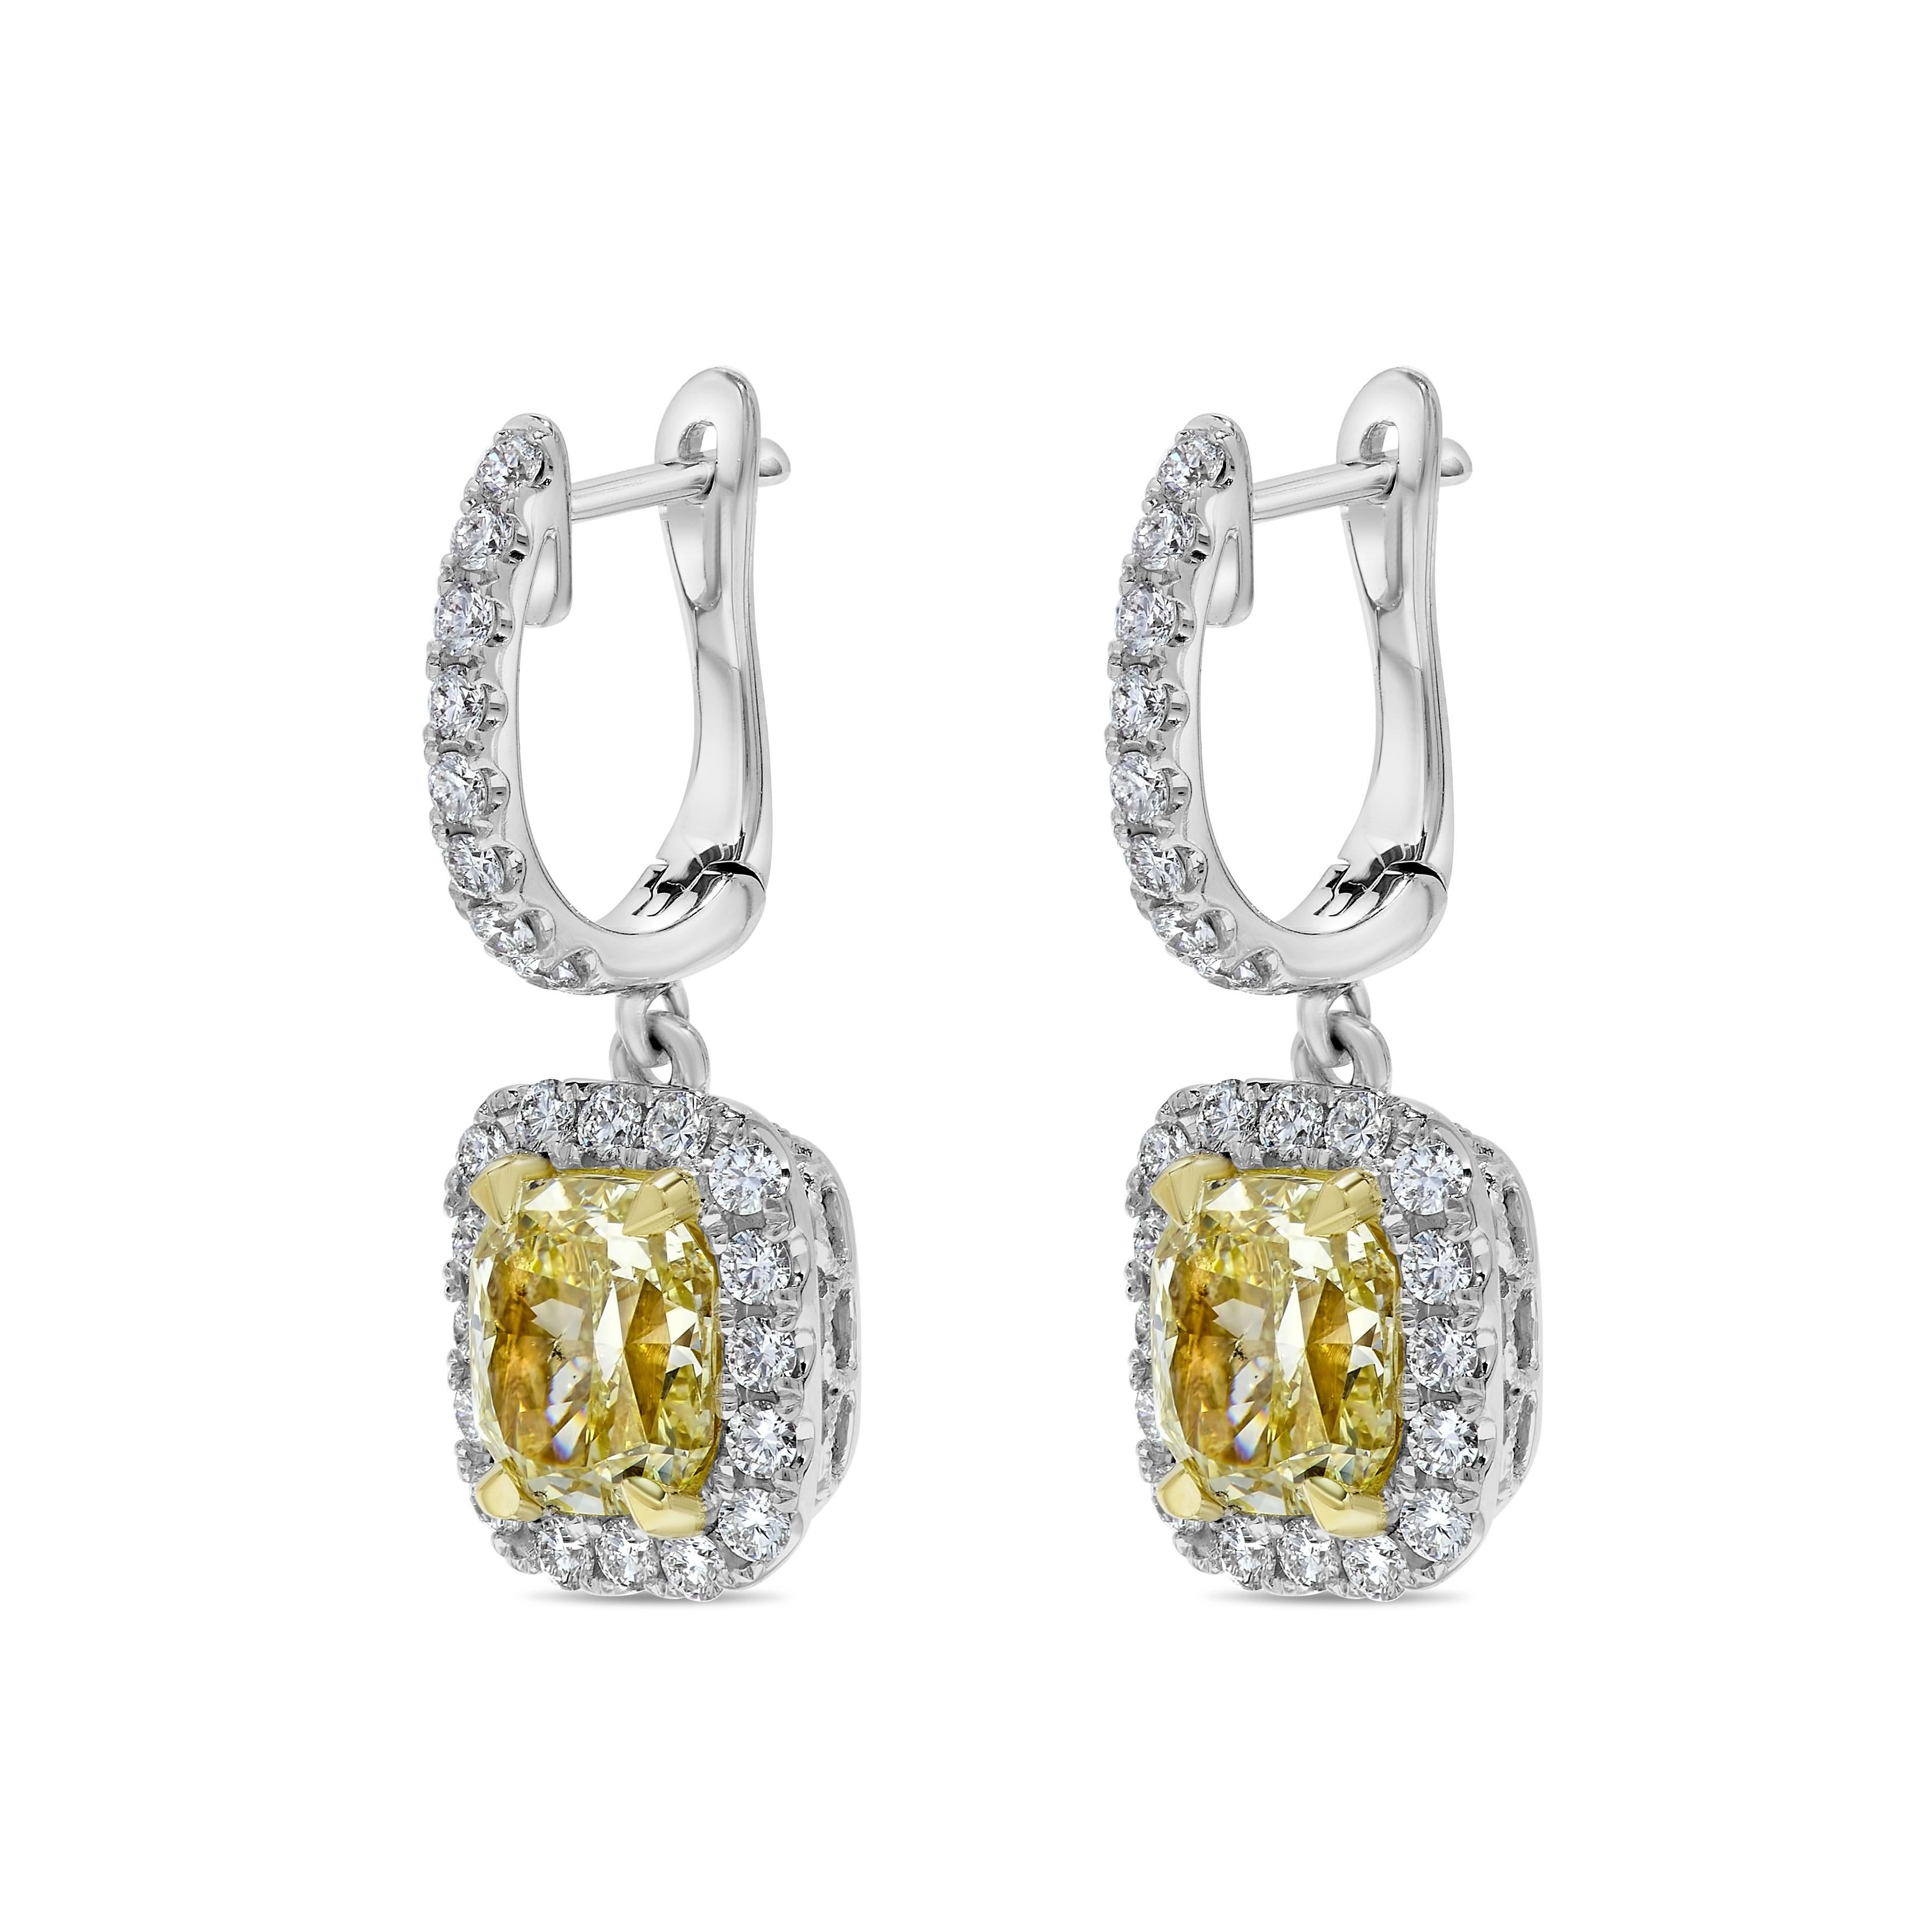 RareGemWorld's classic GIA certified diamond earrings. Mounted in a beautiful 18K Yellow and White Gold setting with natural cushion cut yellow diamonds. The yellow diamonds are surrounded by round natural white diamond melee. These earrings are